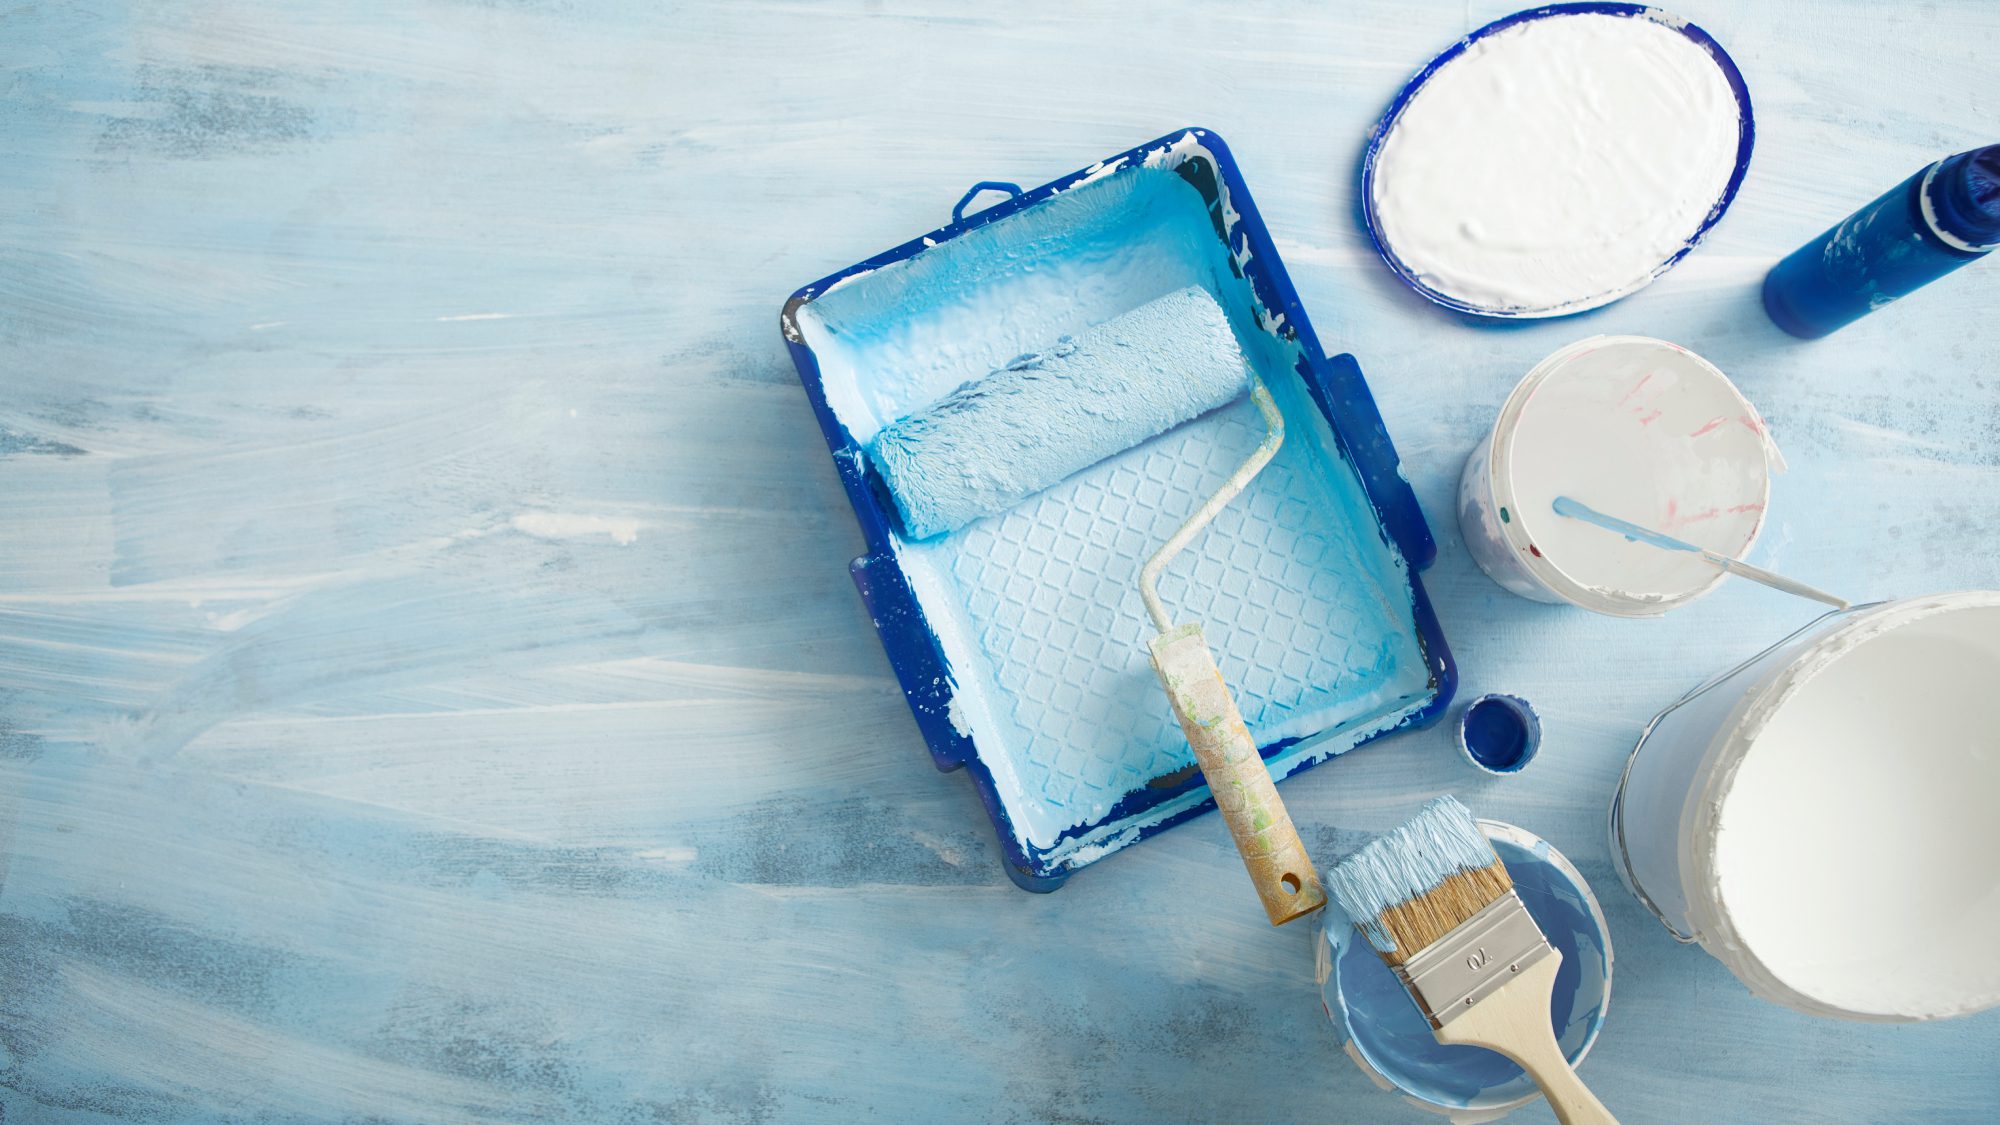 How to clean painting brushes and rollers